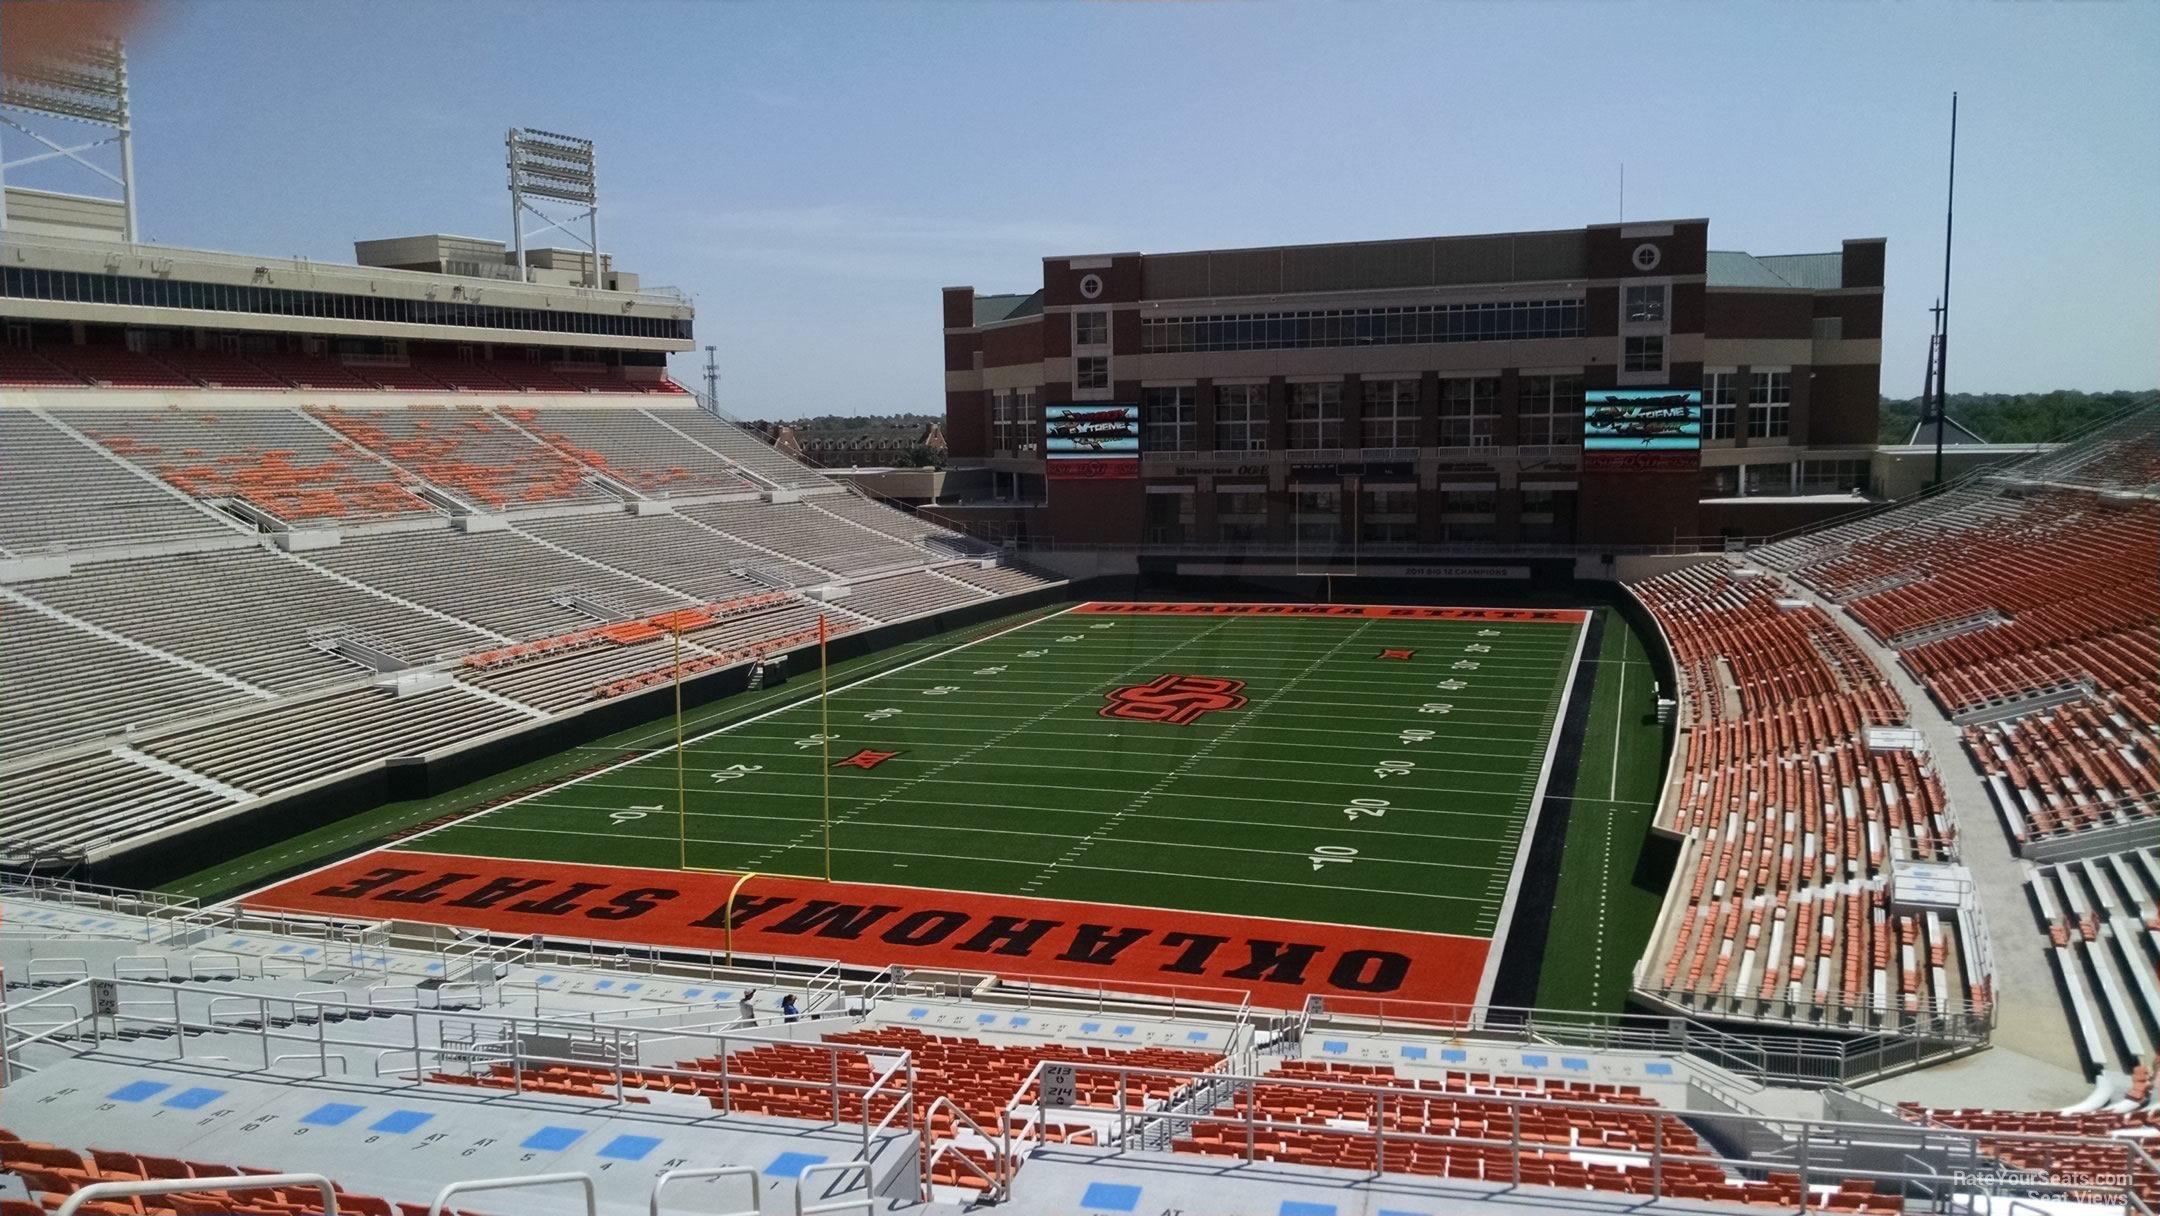 section 316, row 19 seat view  - boone pickens stadium